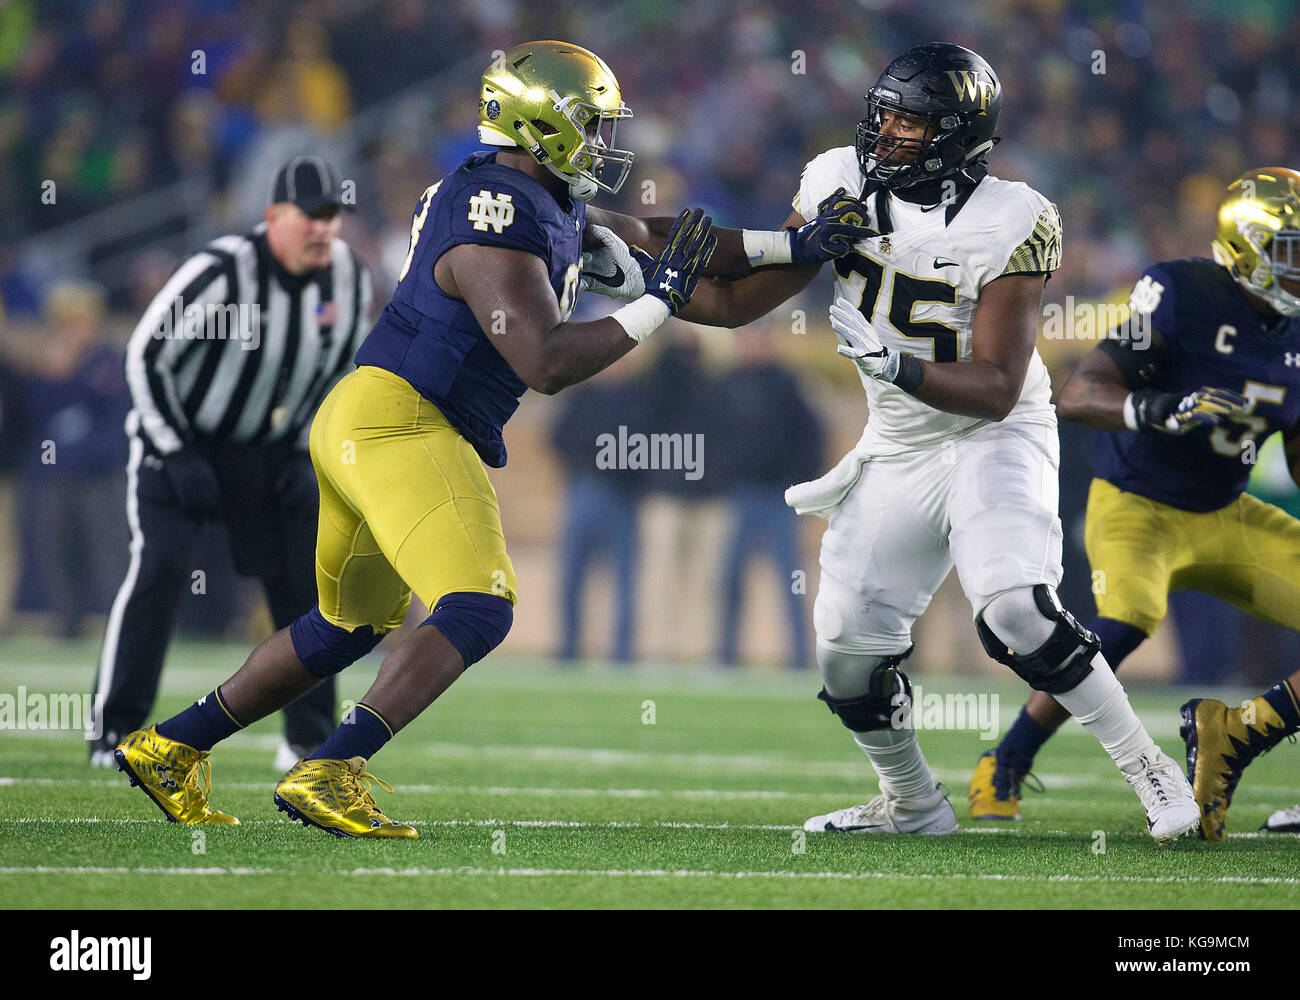 November 04, 2017: Notre Dame defensive lineman Jay Hayes (93) and Wake Forest offensive lineman Justin Herron (75) battle at the line of scrimmage during NCAA football game action between the Wake Forest Demon Deacons and the Notre Dame Fighting Irish at Notre Dame Stadium in South Bend, Indiana. Notre Dame defeated Wake Forest 48-37. John Mersits/CSM Stock Photo